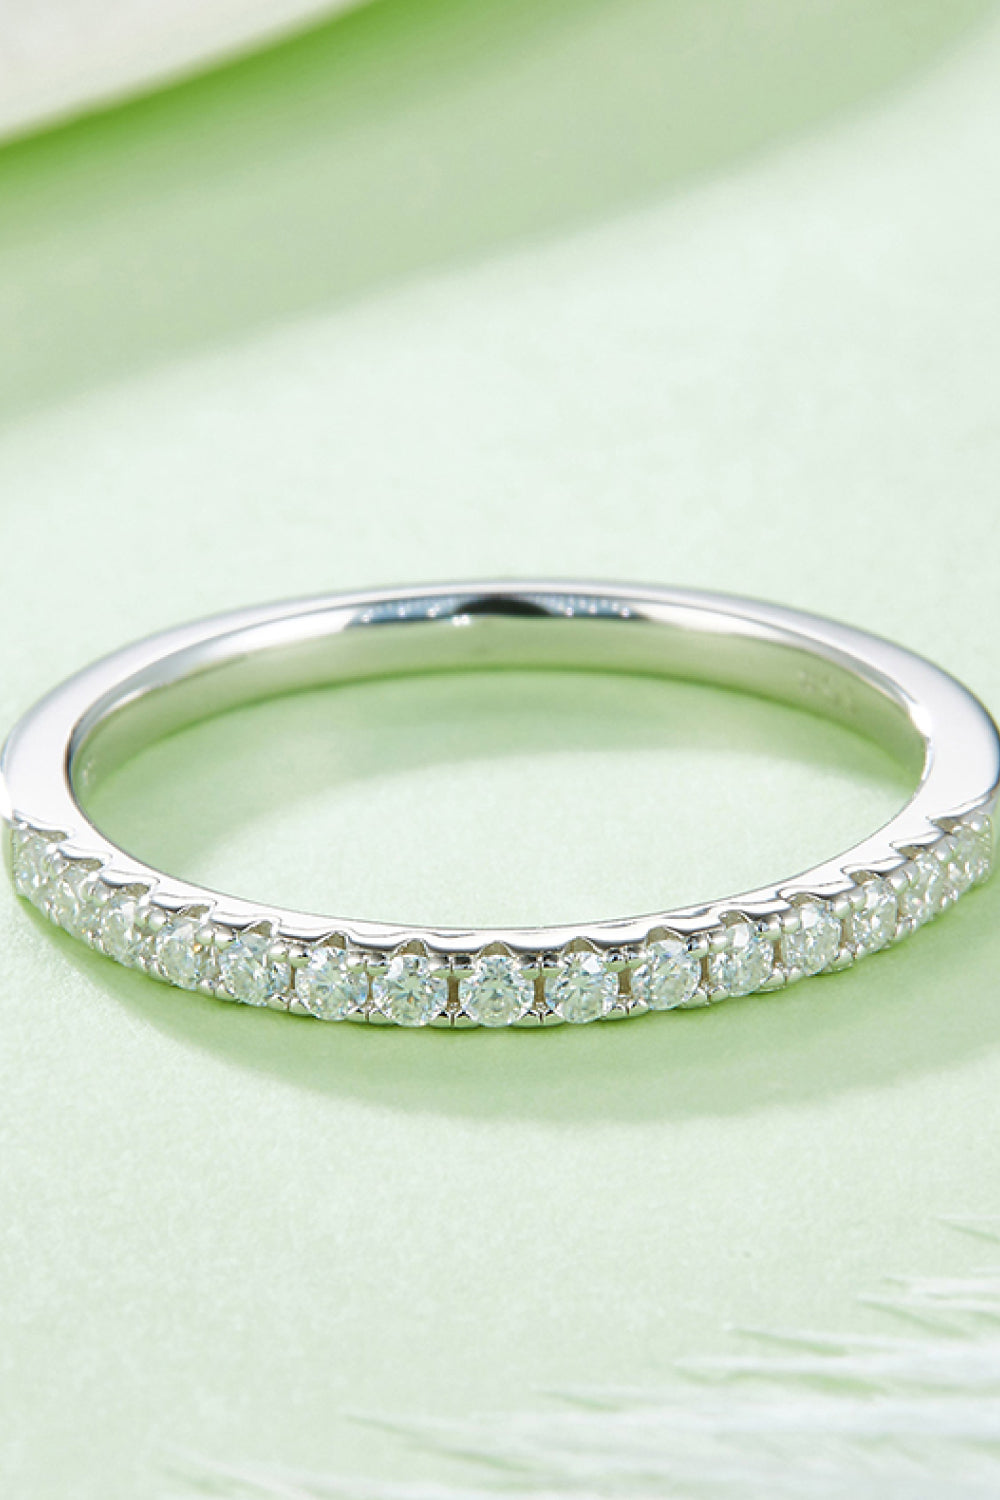 Moissanite Platinum-Plated Half-Eternity Ring-Rings-Inspired by Justeen-Women's Clothing Boutique in Chicago, Illinois